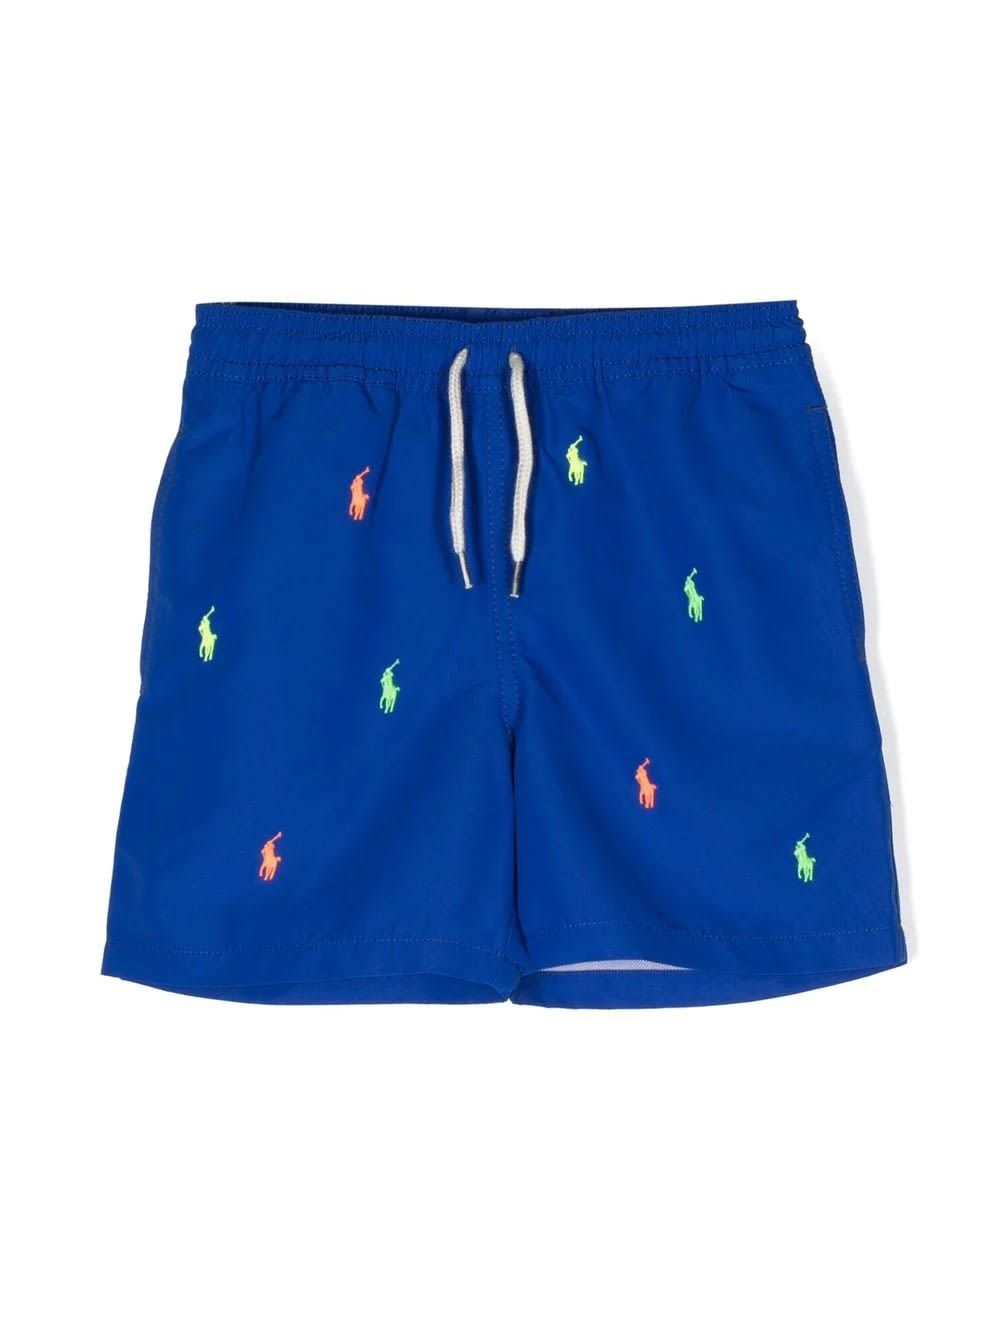 RALPH LAUREN BLUE SWIM SHORTS WITH ALL-OVER PONY